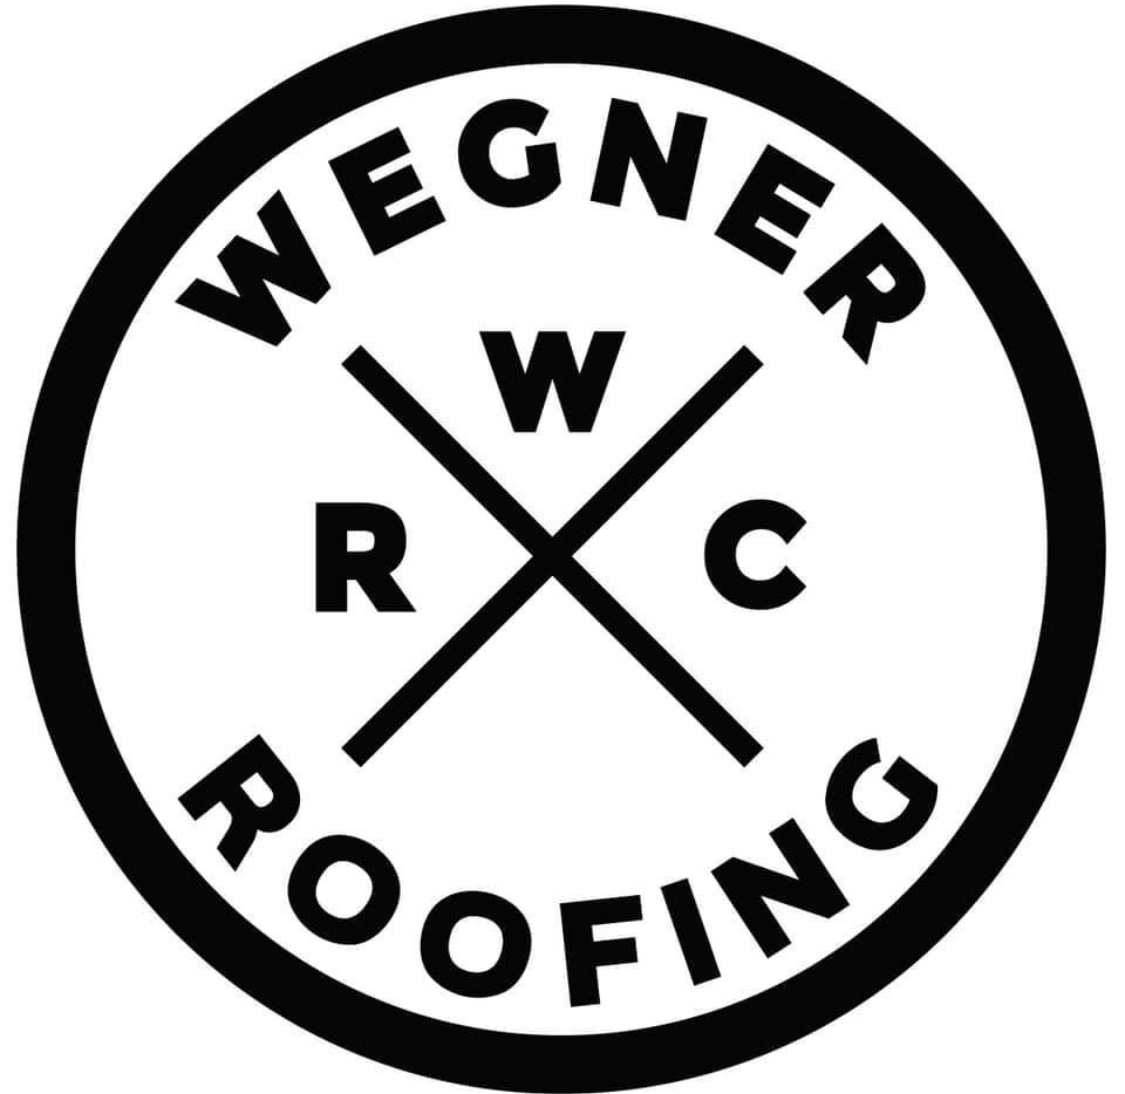 Wegner Roofing and Construction Highlights the Significance of Hiring a Licensed Roofing Company